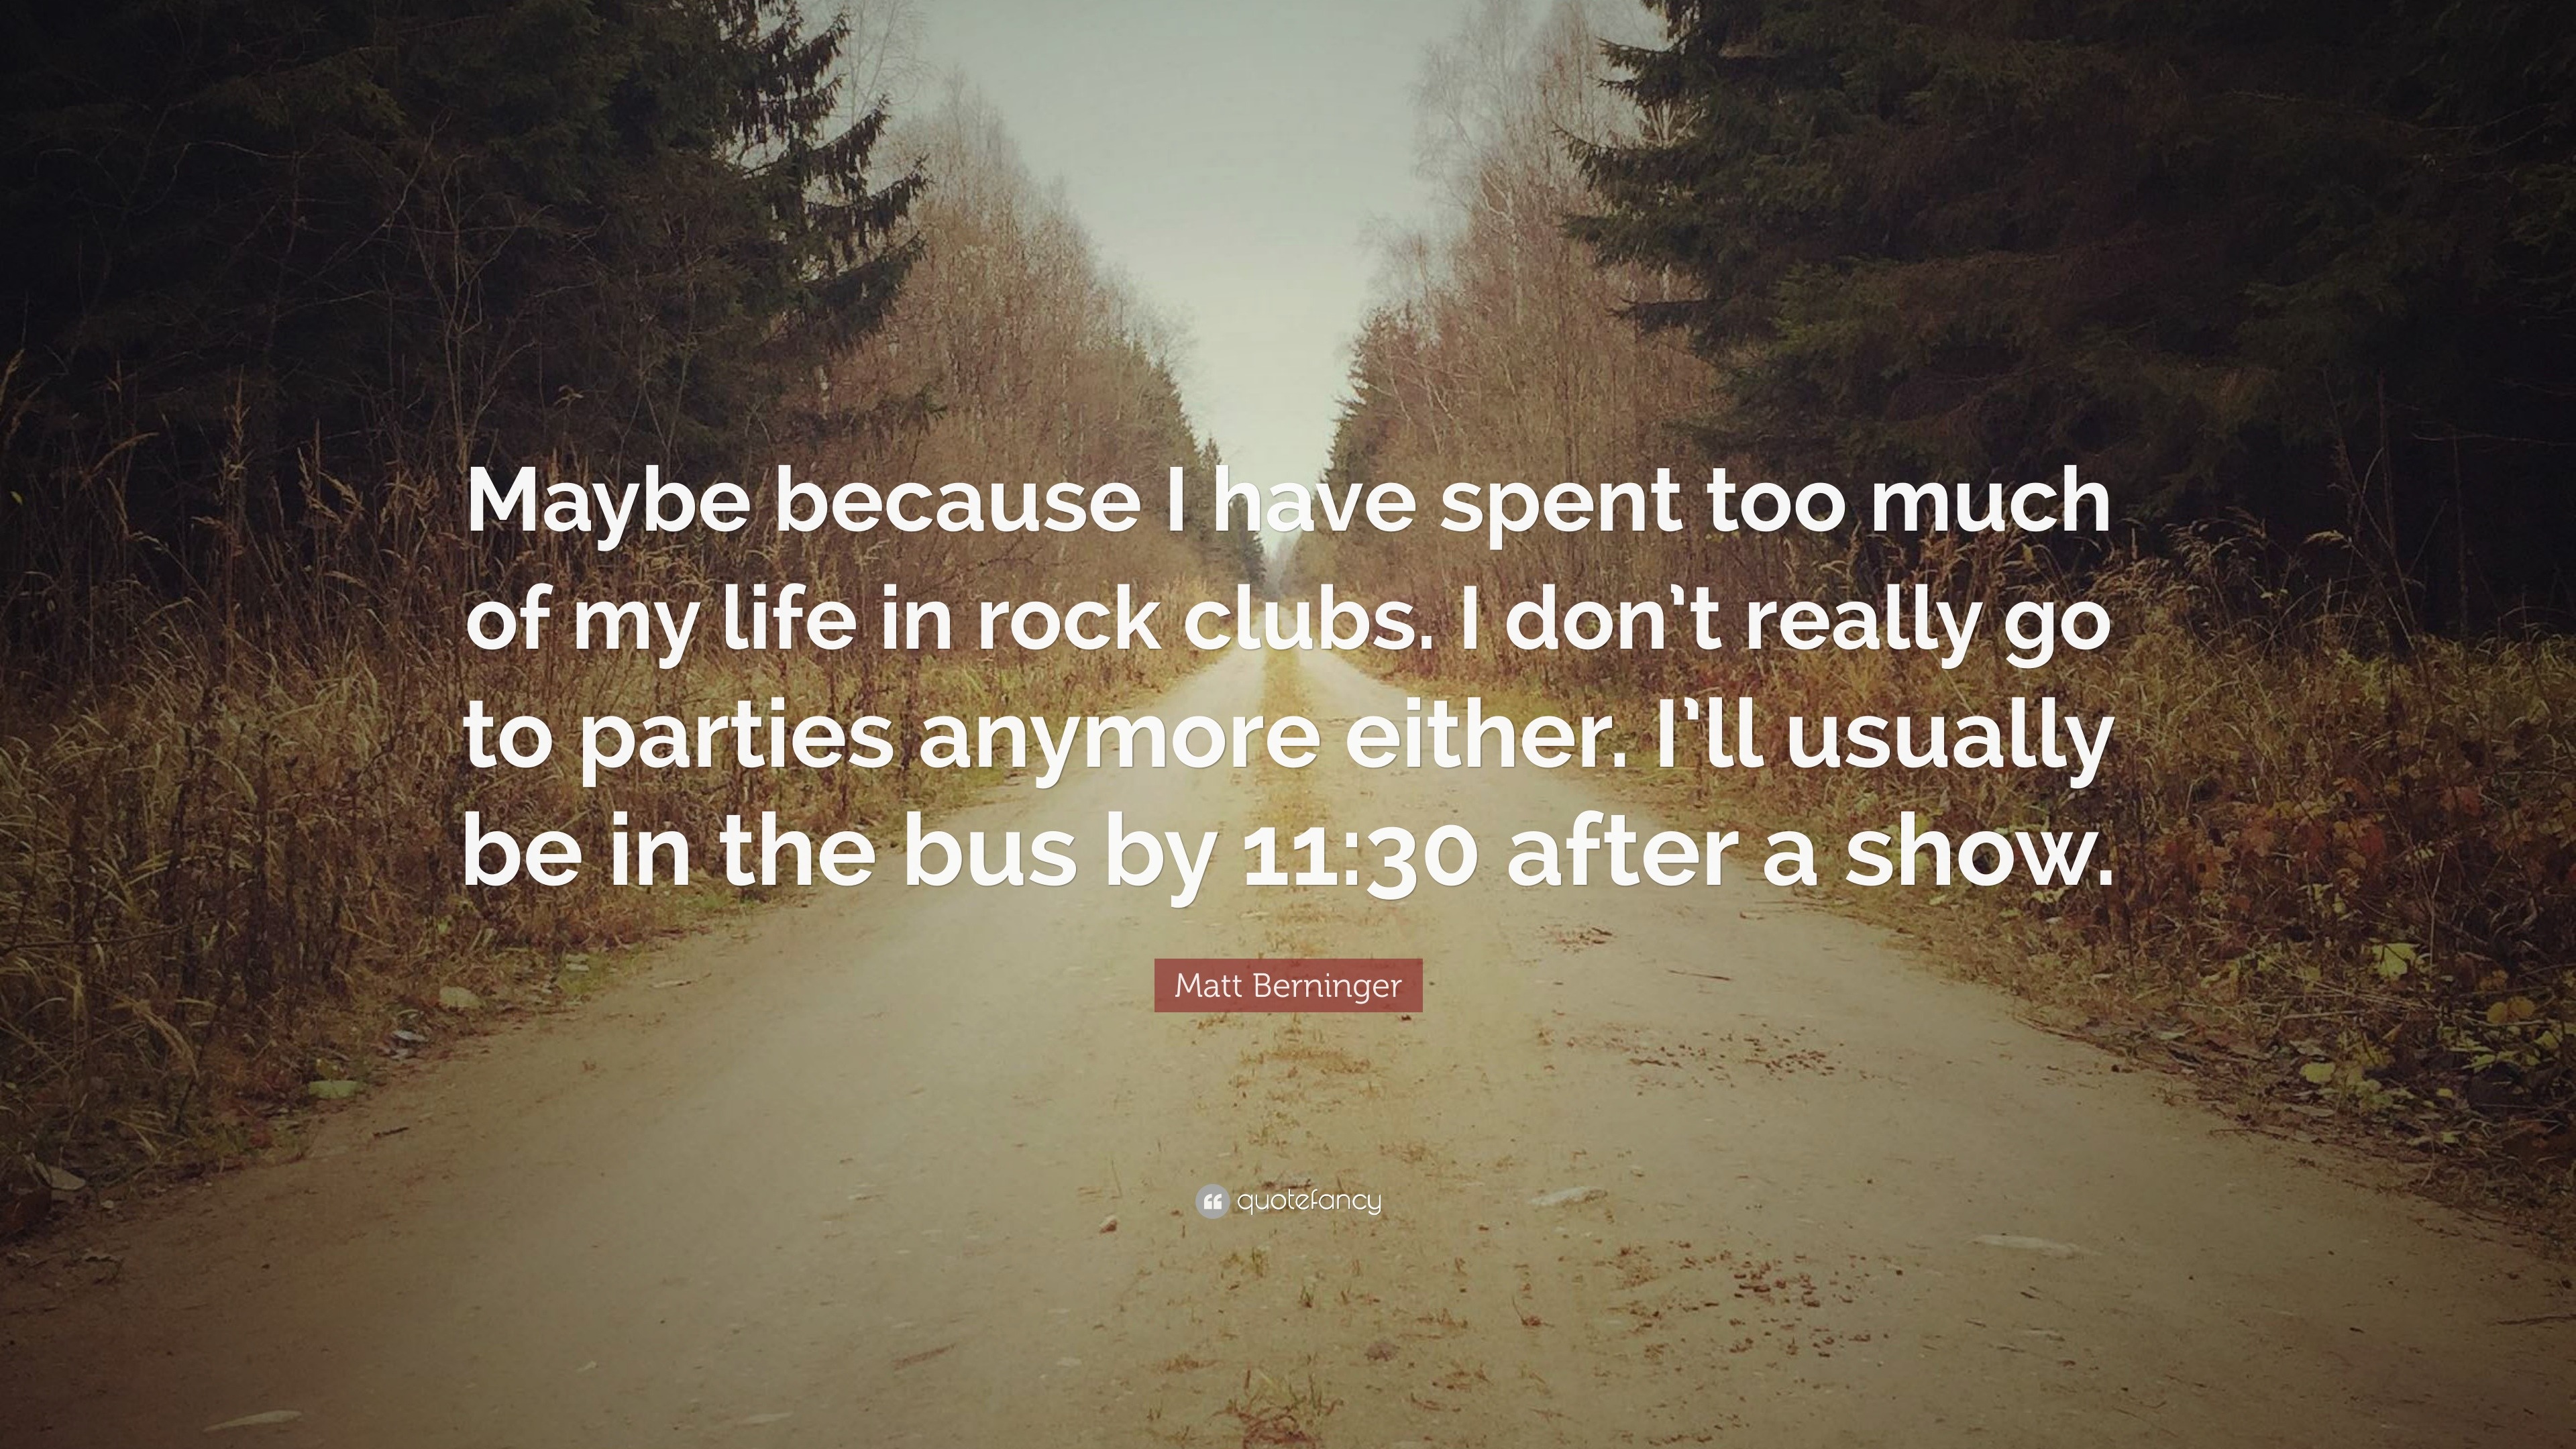 Matt Berninger Quote: “Maybe because I have spent too much of my life ...